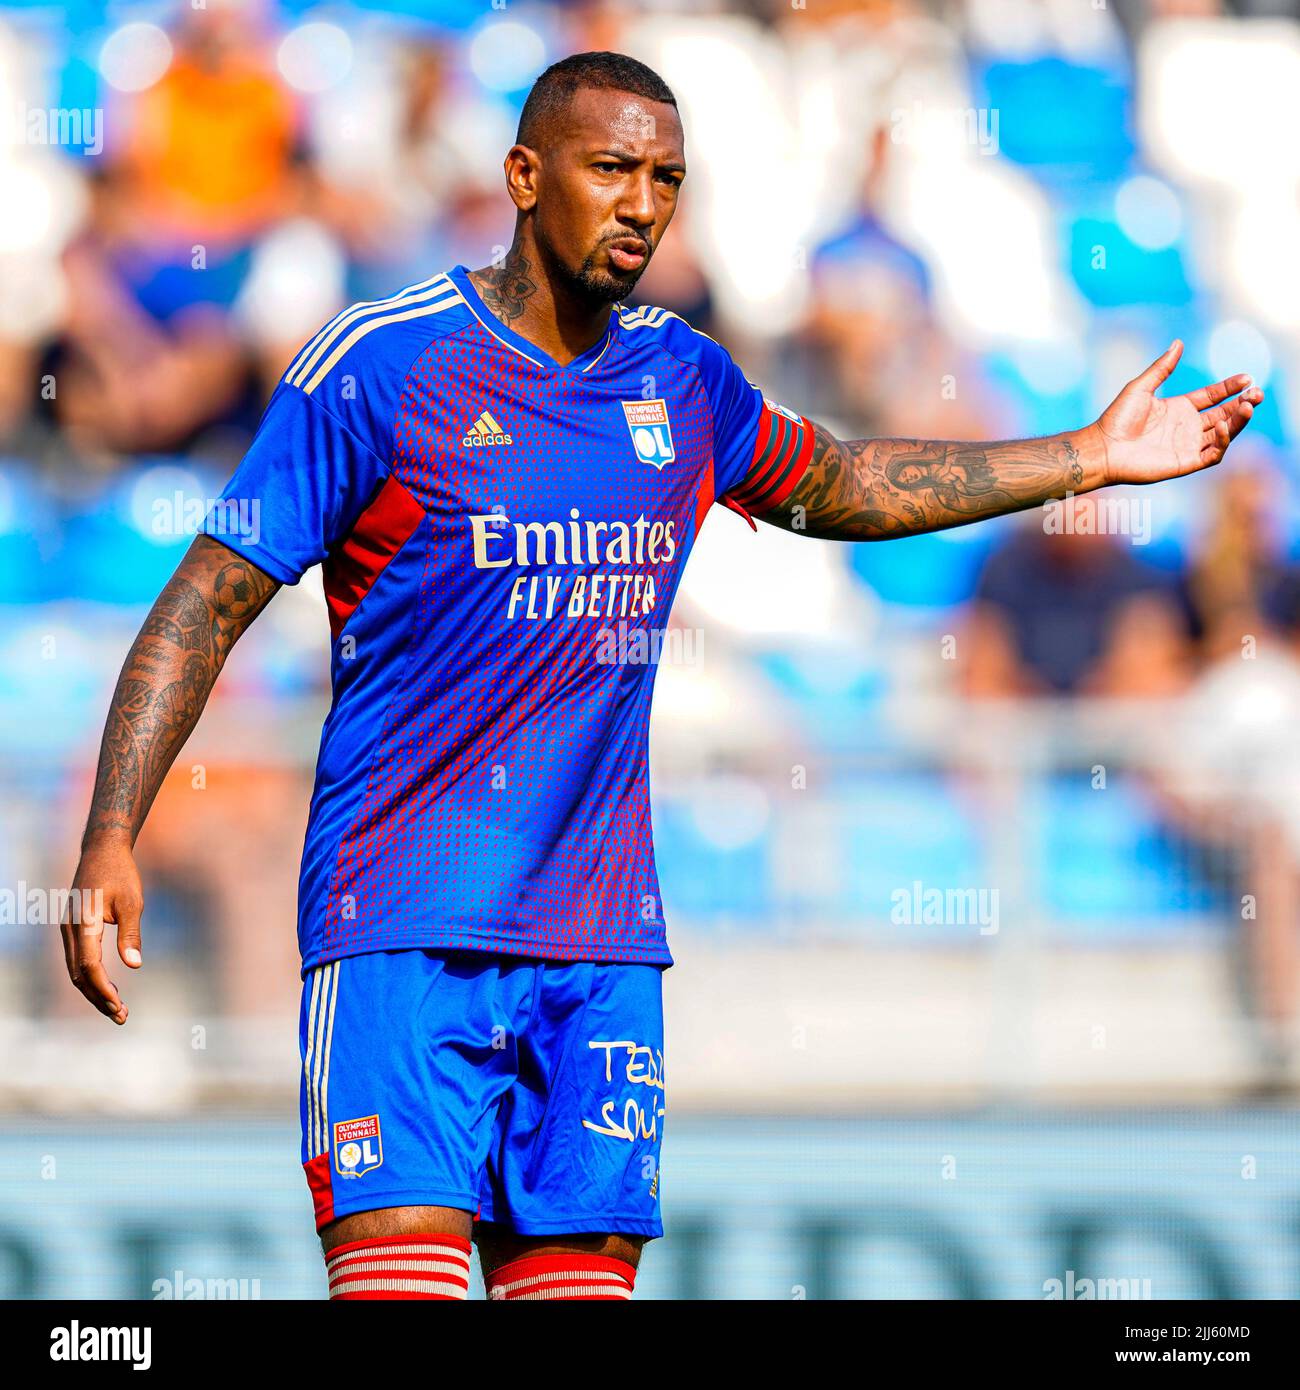 TILBURG, NETHERLANDS - JULY 23: Jerome Boateng of Olympique Lyon during the pre-season friendly match between Willem II and Olympique Lyon at Koning Willem II stadion on July 23, 2022 in Tilburg, Netherlands (Photo by Geert van Erven/Orange Pictures) Stock Photo